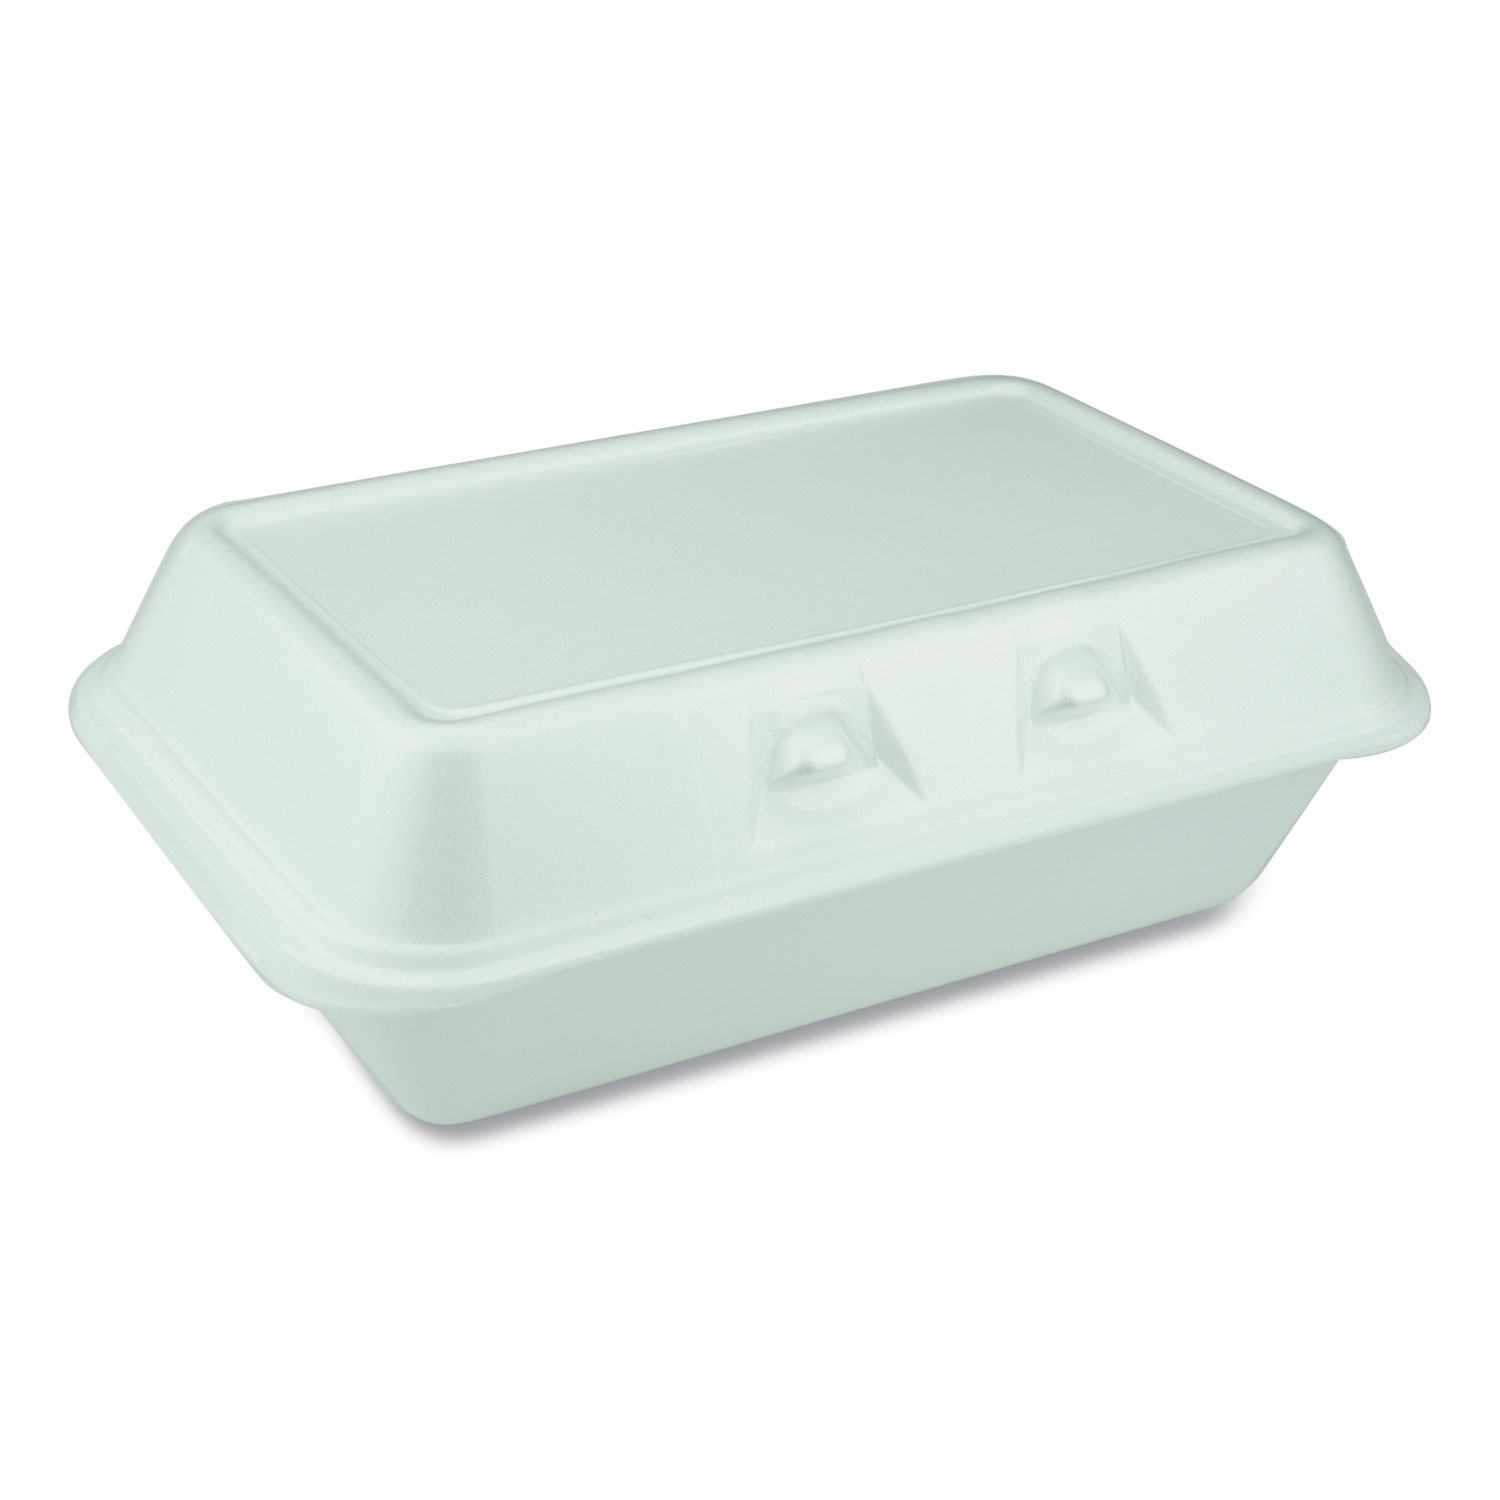 Tray - 3 Compartment Foam Tray w/ Hinged Lid